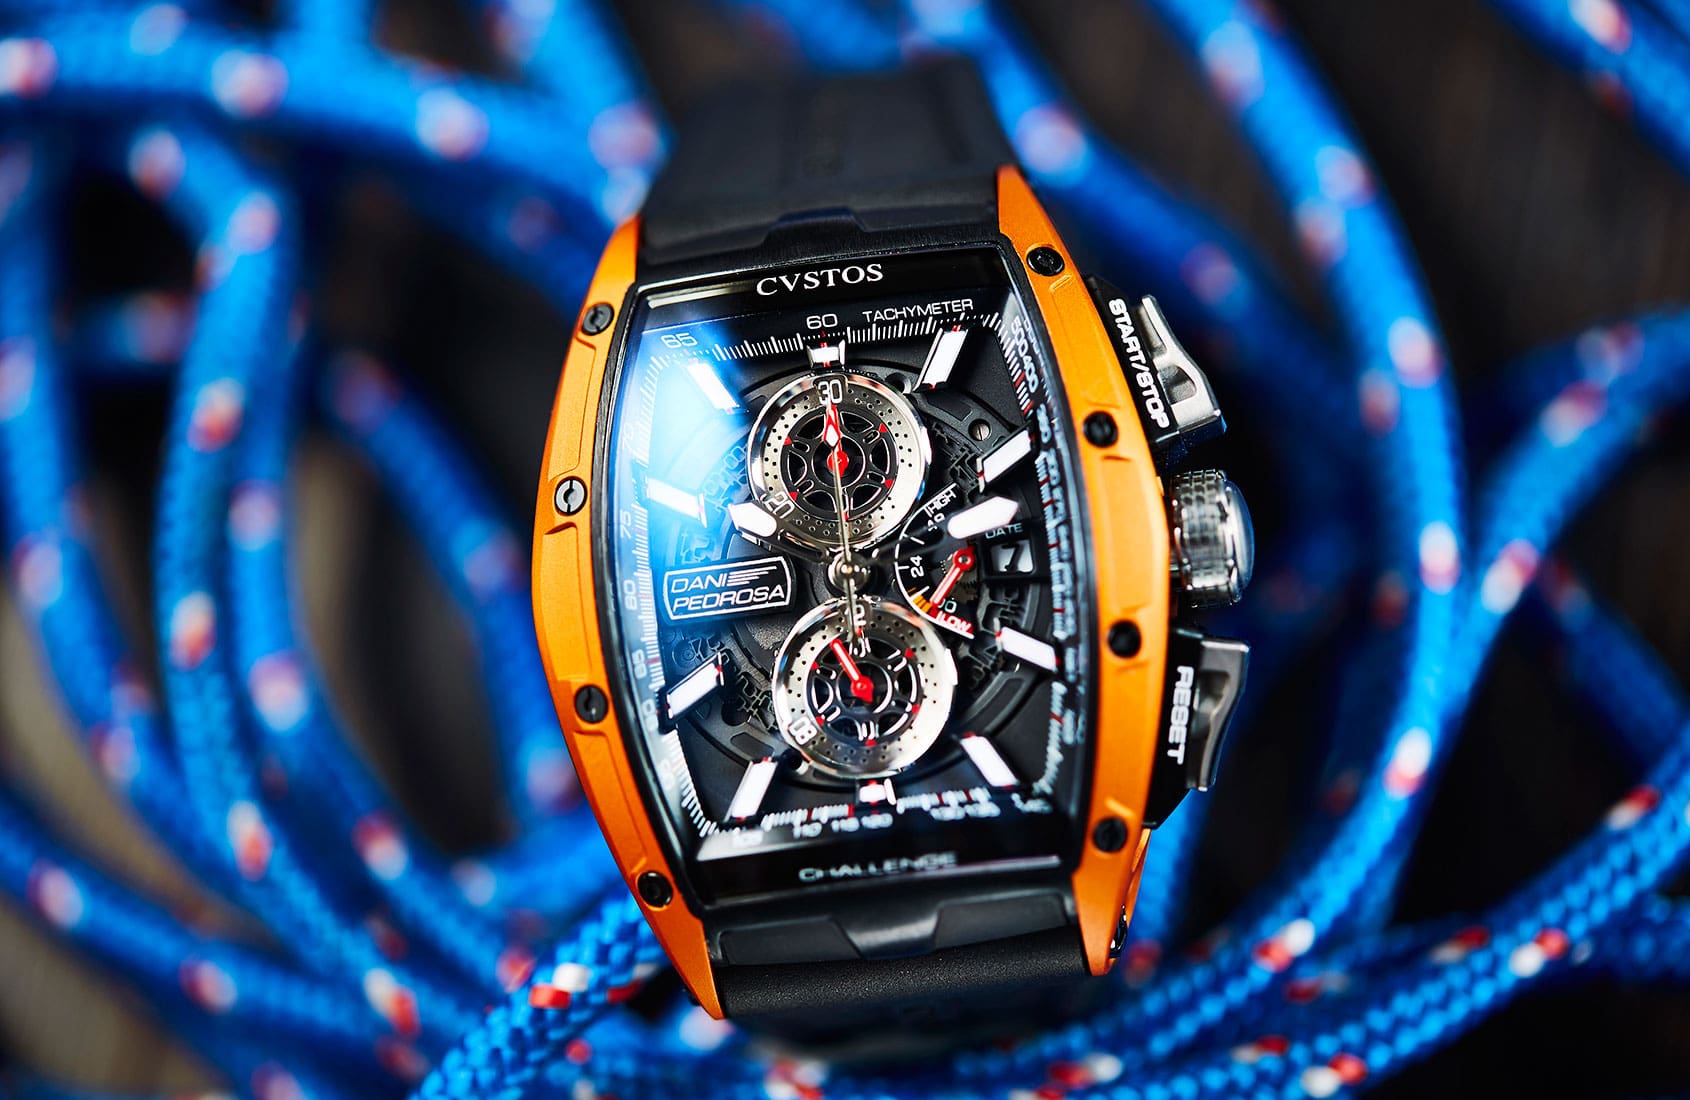 HANDS-ON: The Cvstos Challenge GT Chronograph